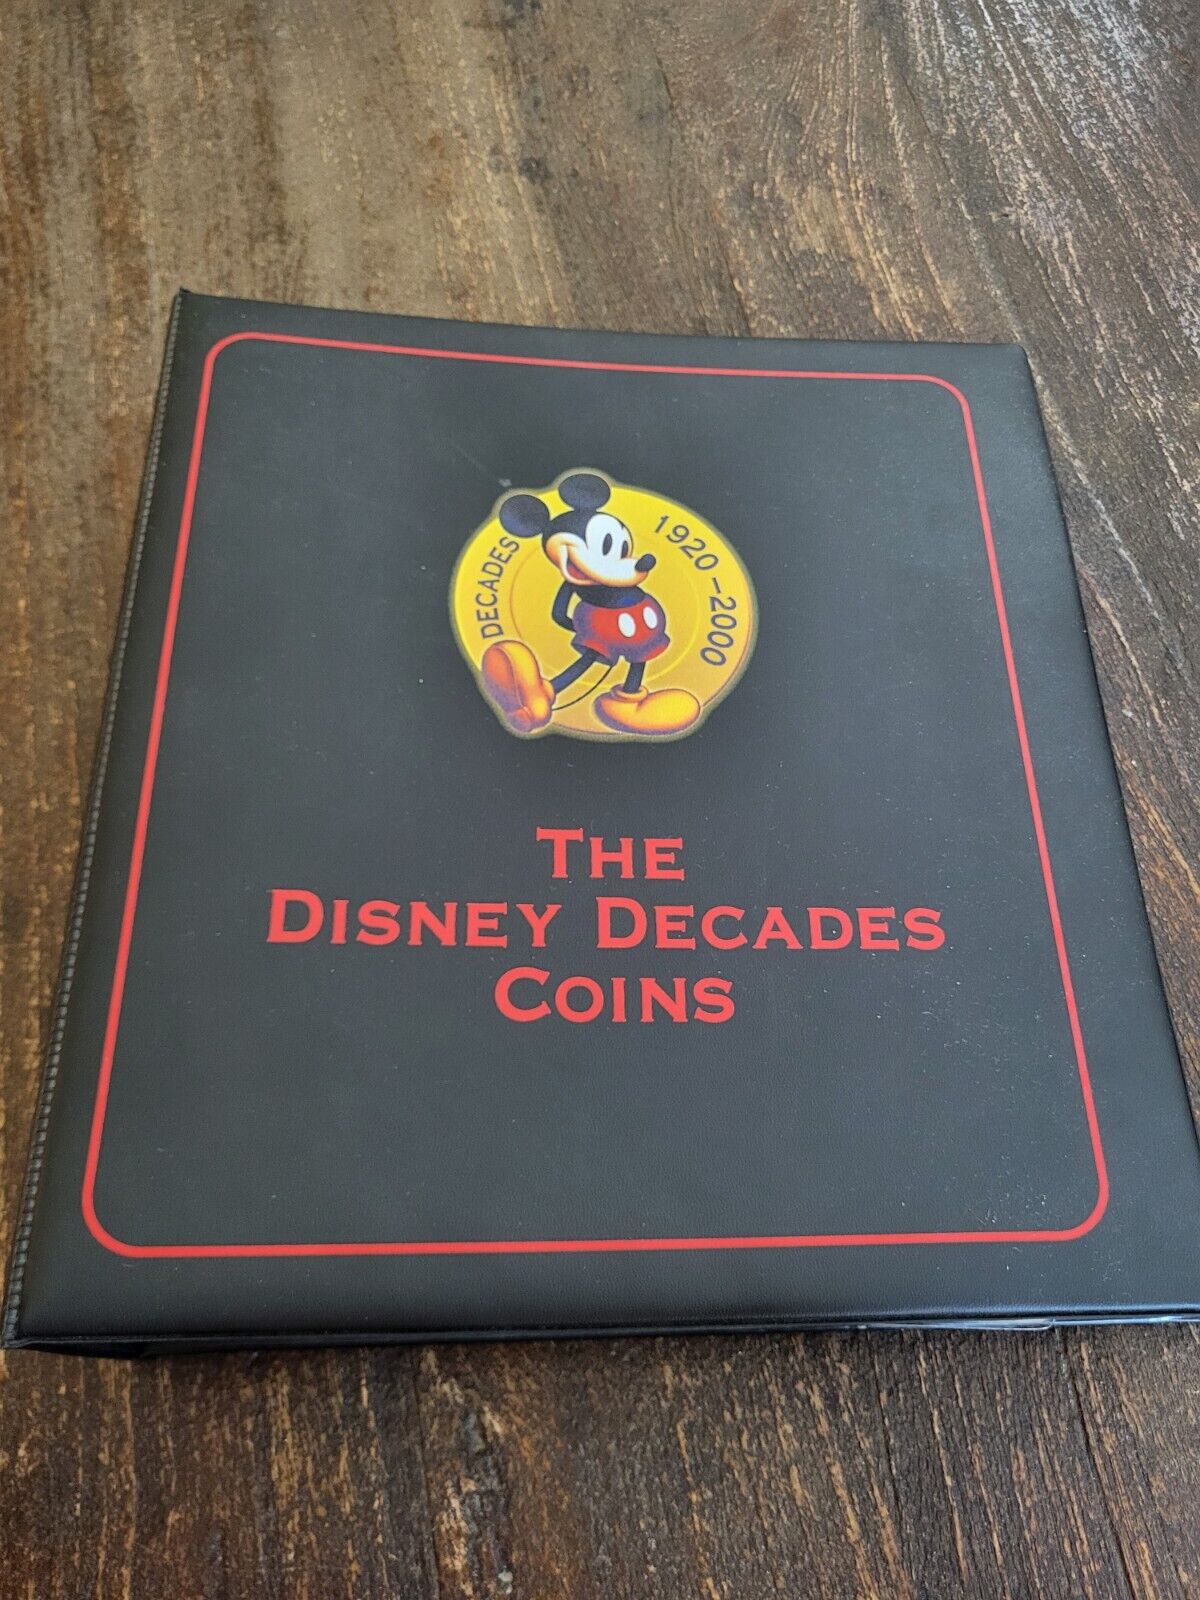 Disney Decades Coins and Collectors Cards 55 Full Set - 1920 - 2000 - very nice